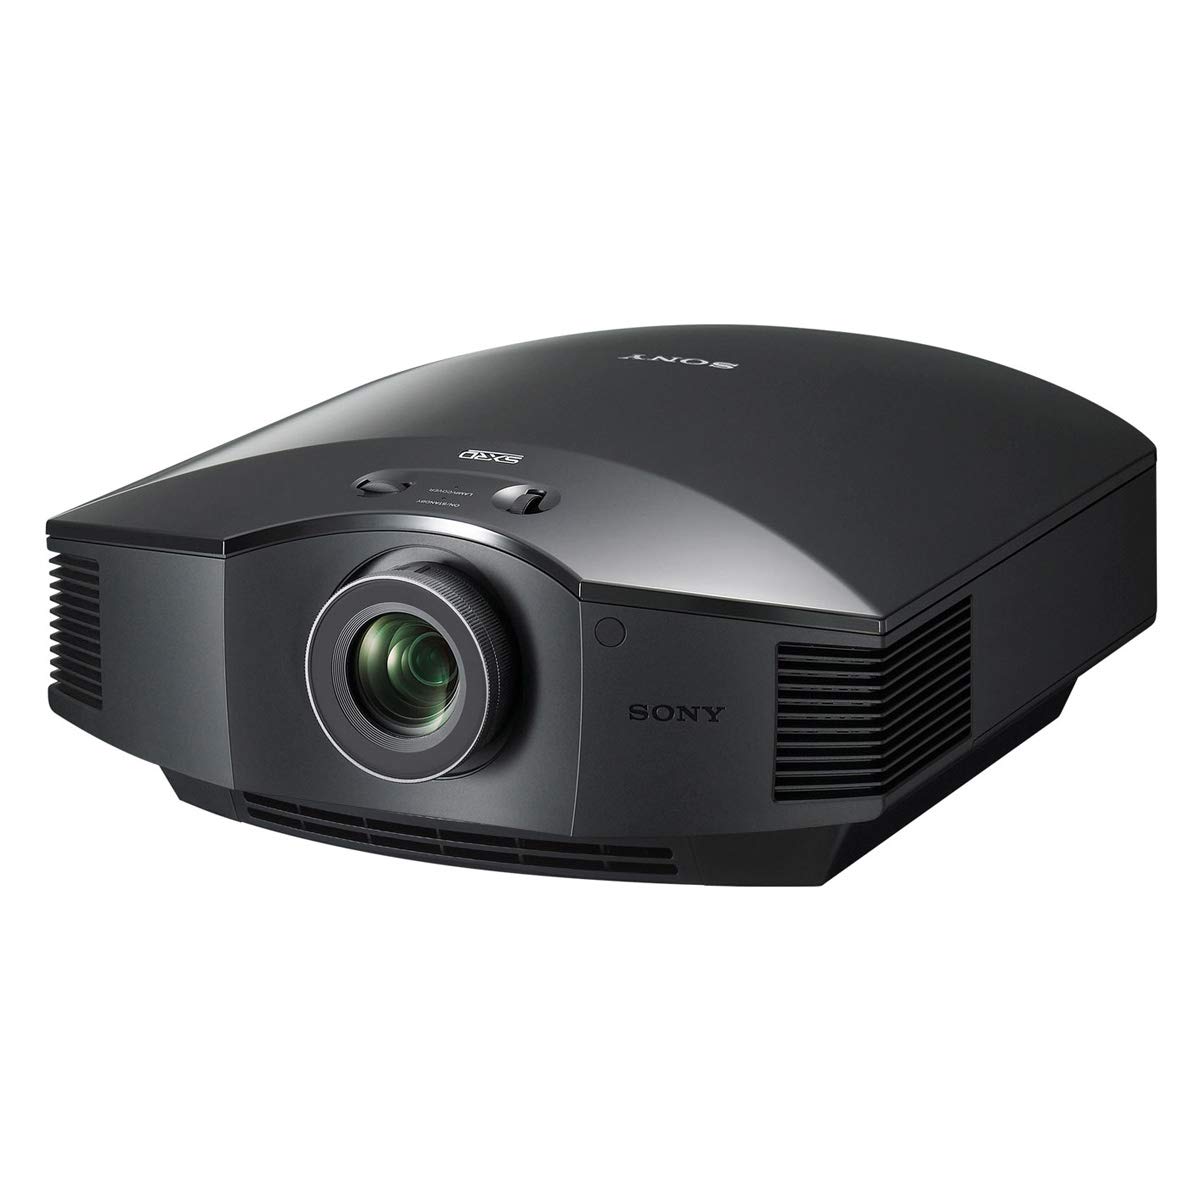 Sony Home Theater Projector VPL-HW45ES: 1080P Full HD Video Projector for TV, Movies and Gaming - Home Cinema Projector with 3 SXRD Imagers and 1,800 Lumens for Brightness - 3D Compatible